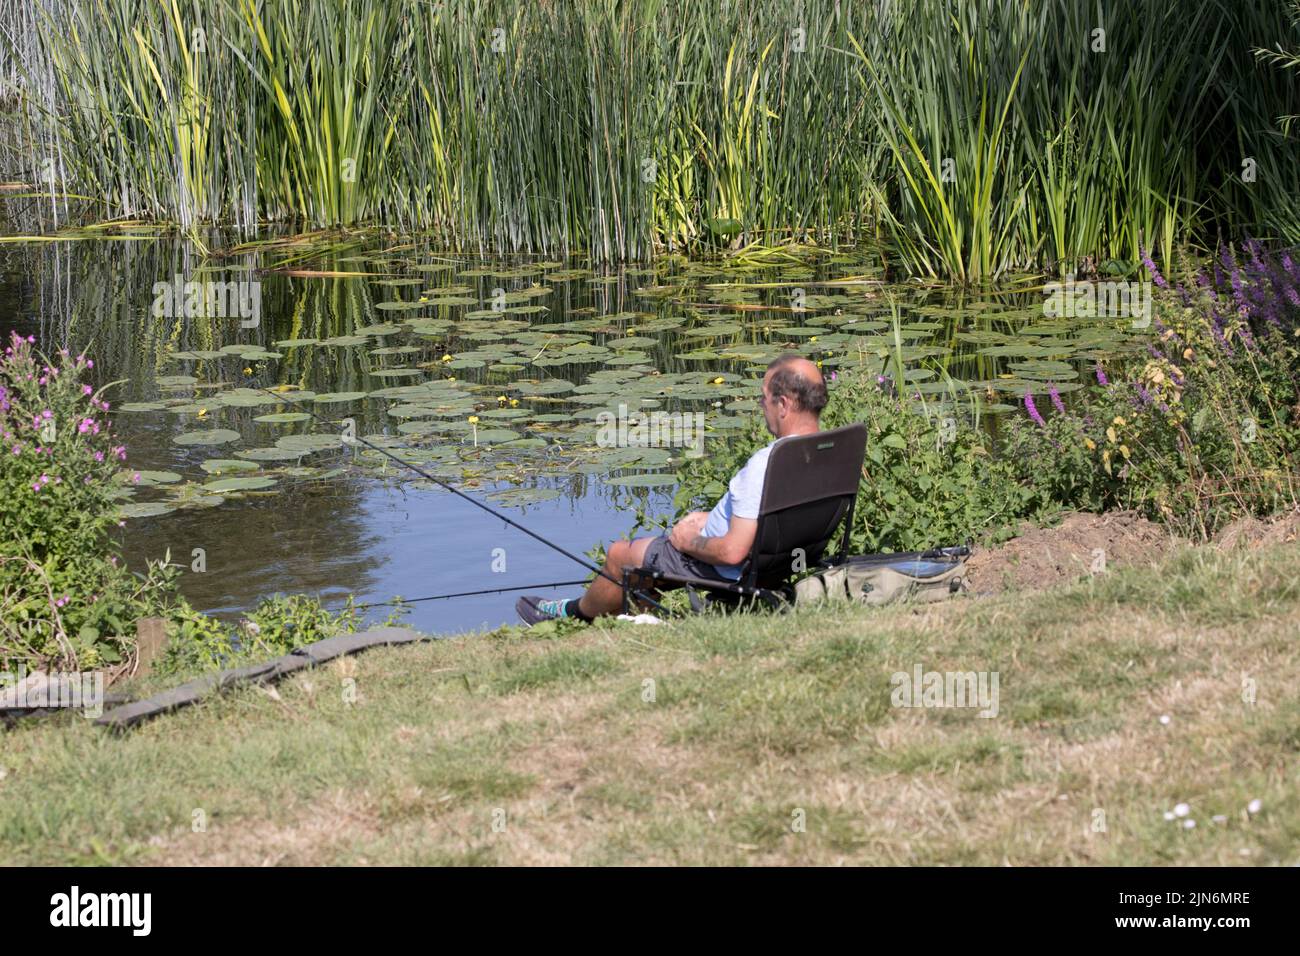 FIsherman with rod and line relaxing by lil;y-covered inlet on River Avon Weston on Avon UK Stock Photo